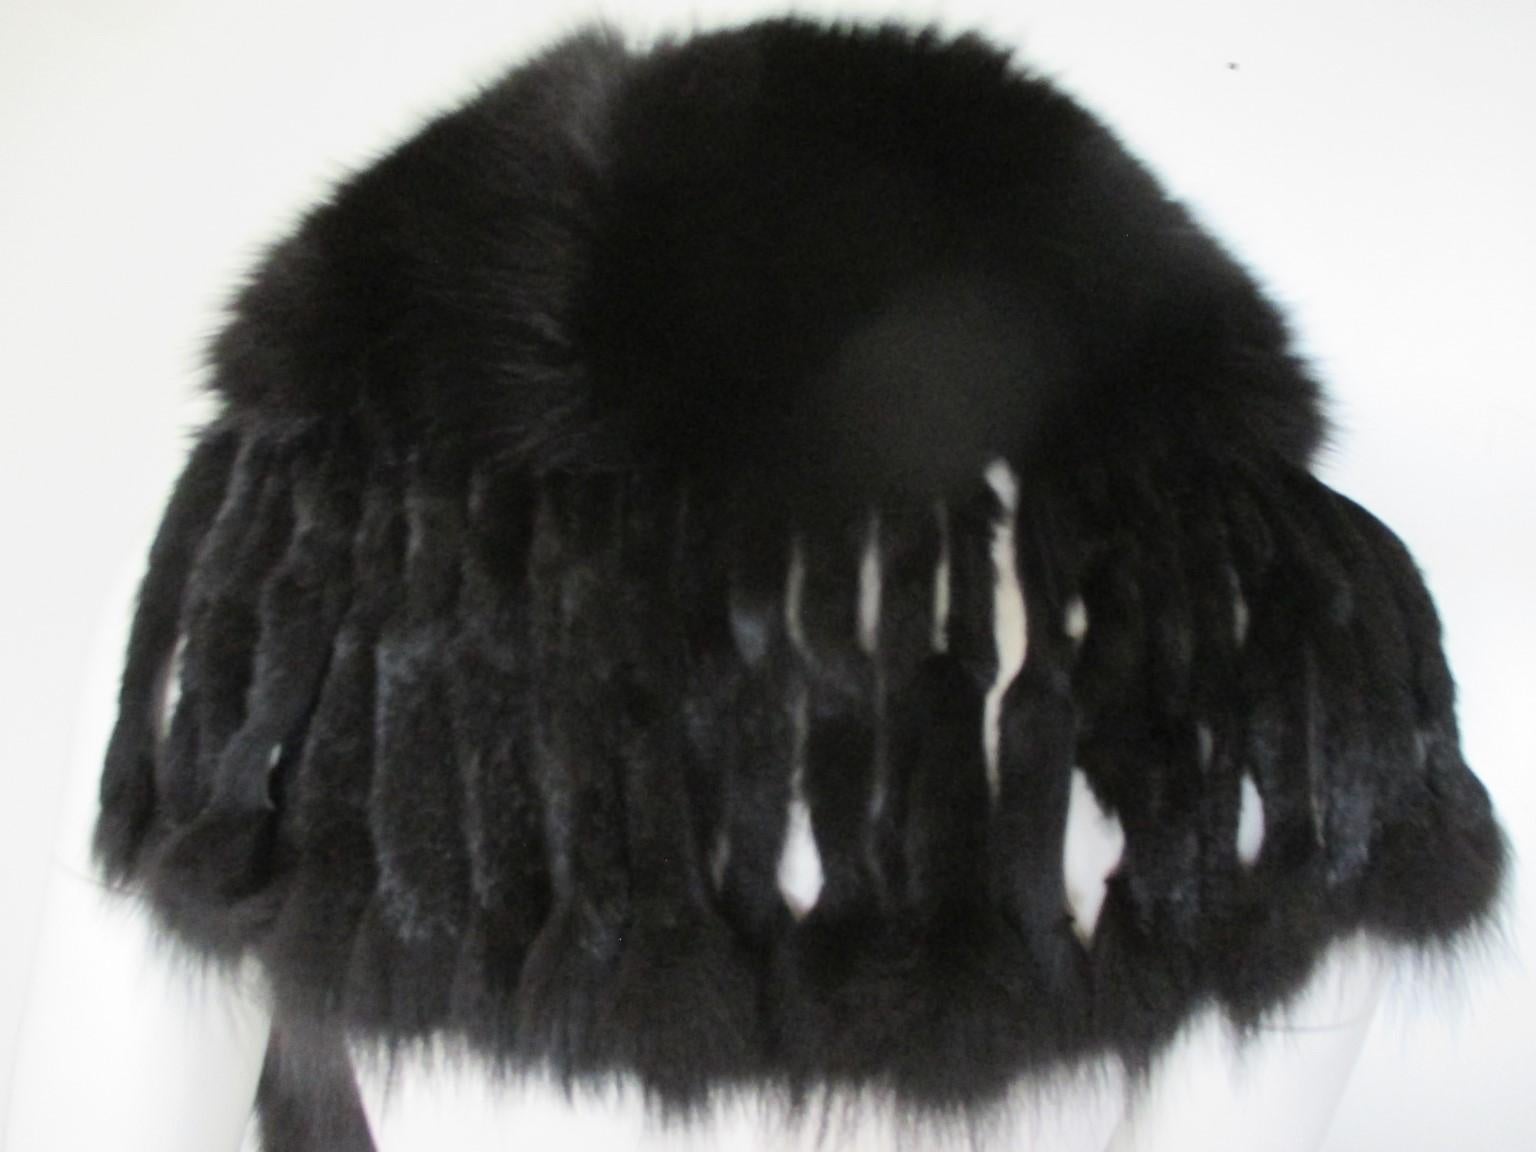 This beautiful stole collar is made of black soft High-quality fox fur with fringed rabbit fur.

We offer more luxury fur products, view our frontstore.
Details:
Fully lined
Nice to wear on chilly evenings for party's or on jeans.
In very good